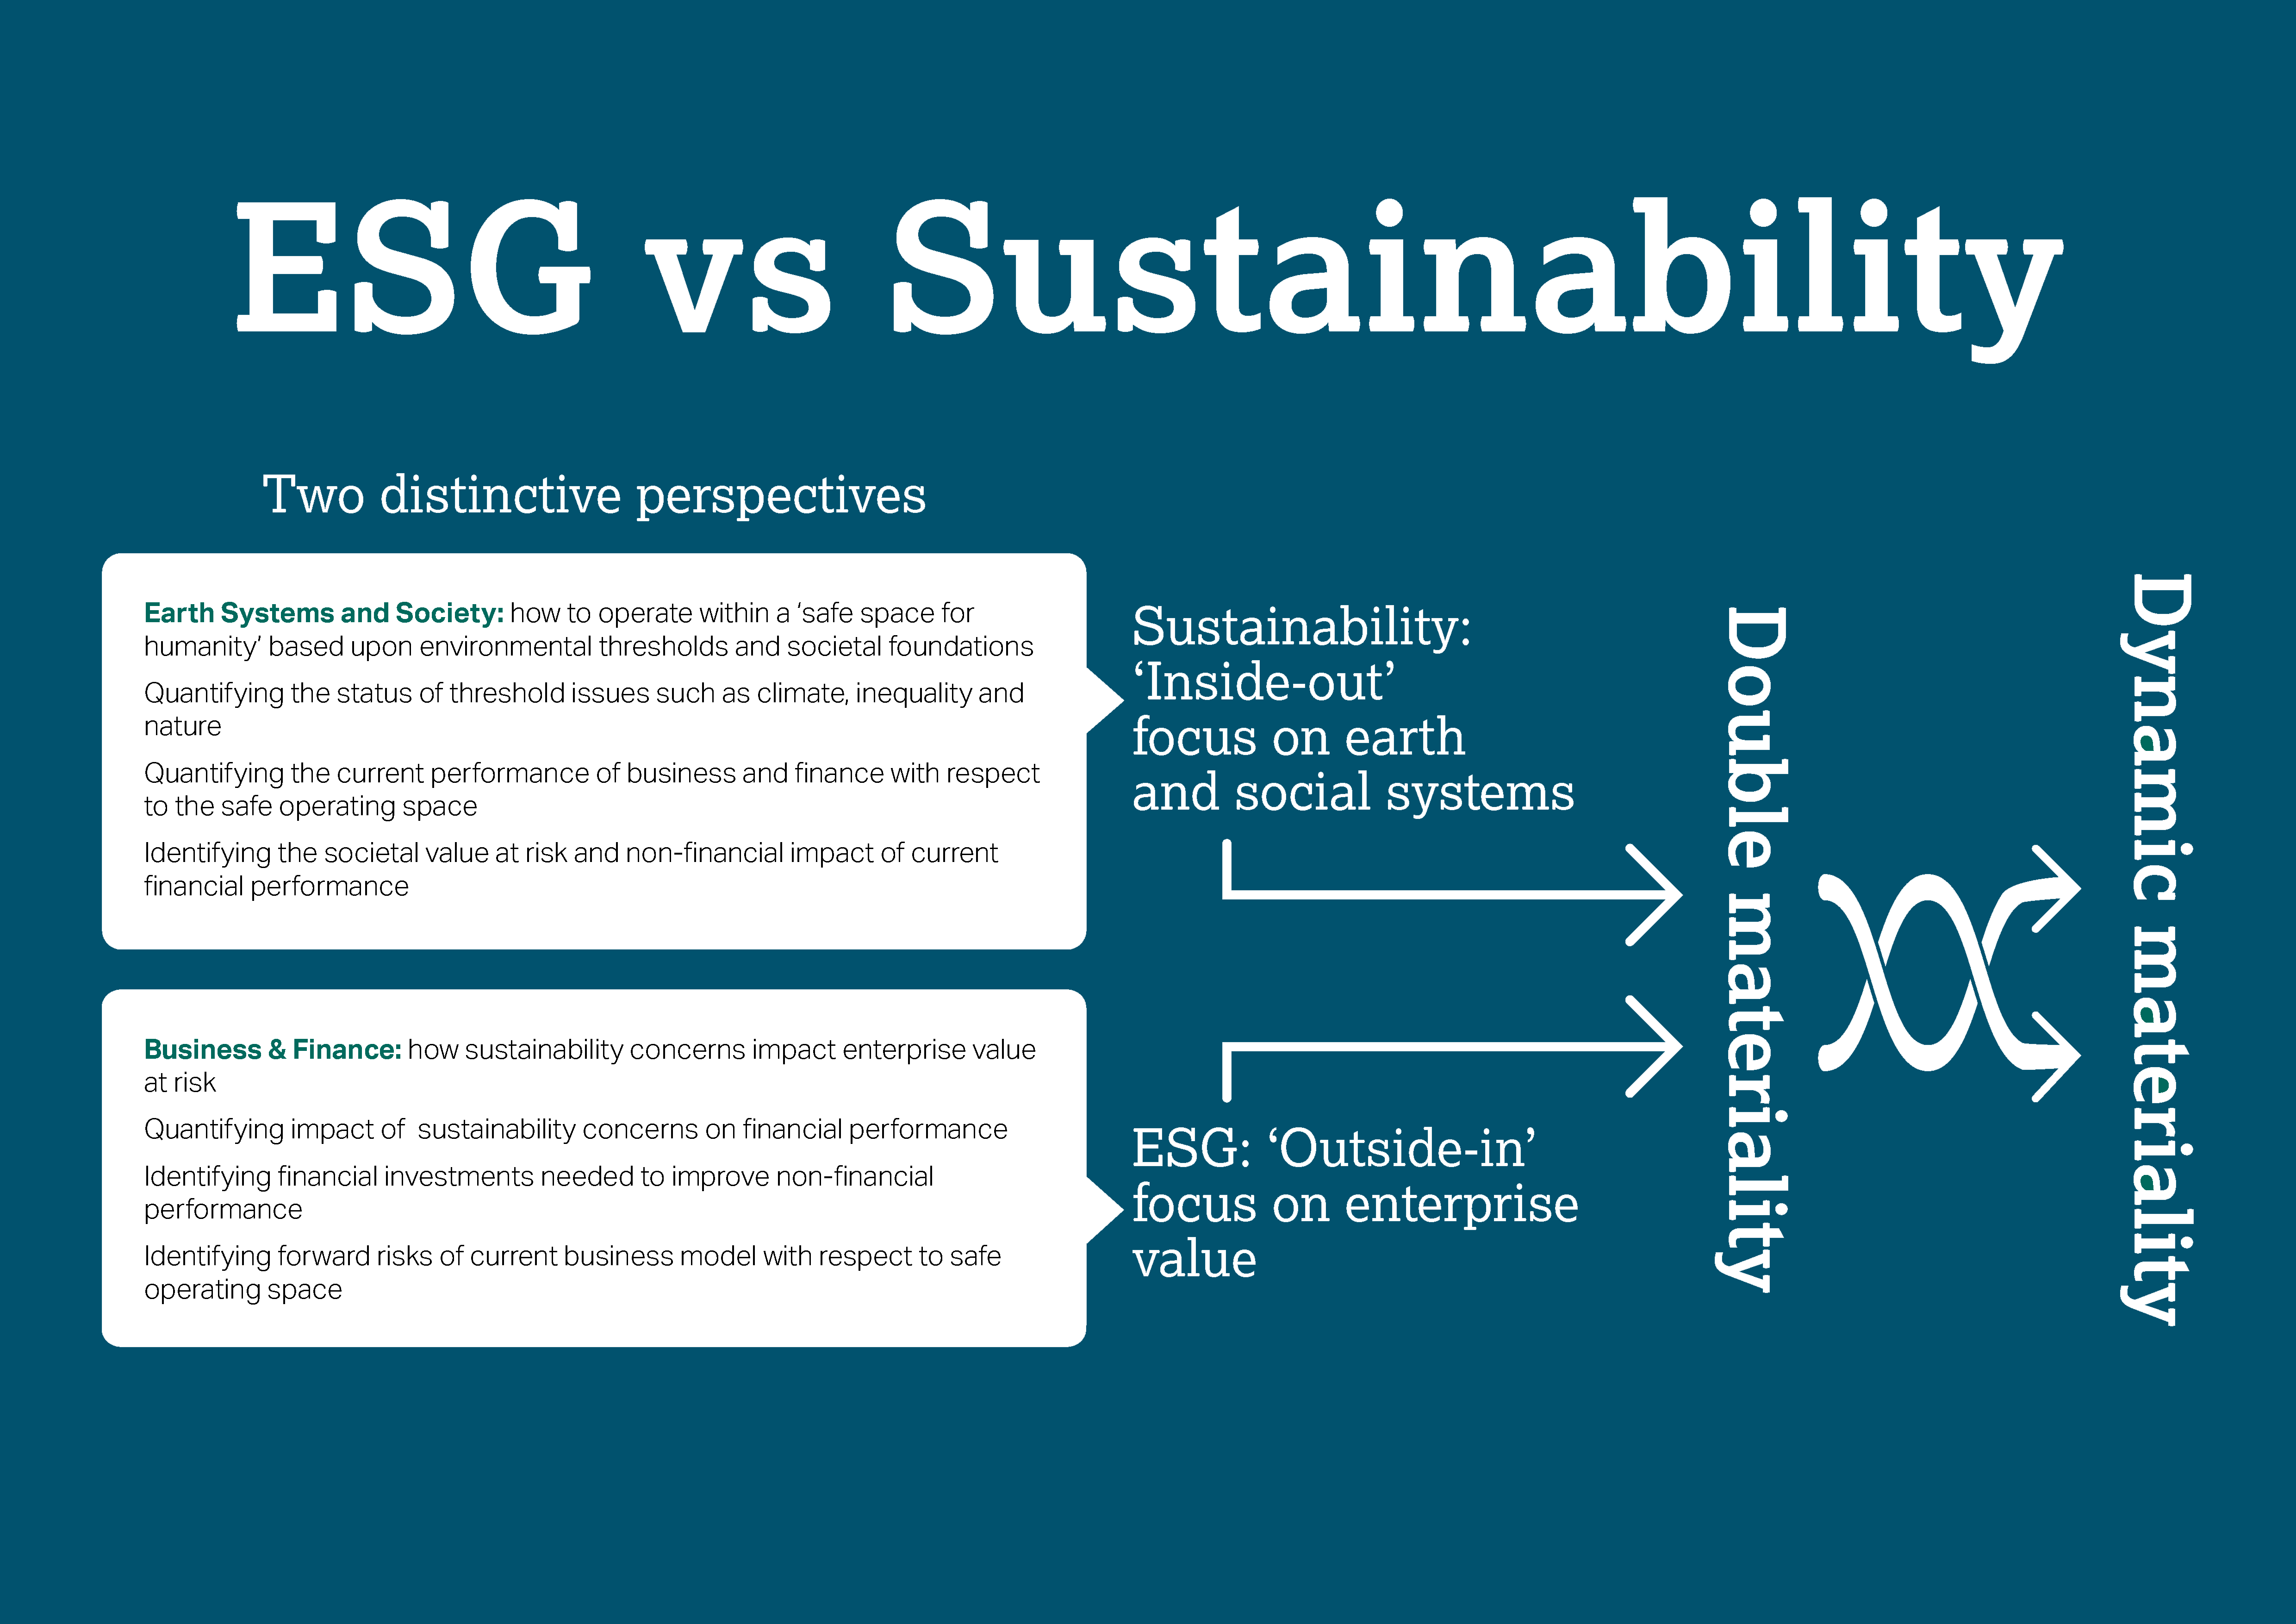 We are confident in our ability to tackle the challenge of balancing ESG and sustainability. Let's take a closer look at the DIAGRM and find solutions that not only meet ESG standards, but also support sustainable practices. We believe that by leveraging our knowledge and expertise, we can navigate this complex landscape and create positive outcomes for both our company and the environment. Together, we can successfully integrate ESG and sustainability into our business practices, and make a lasting impact on the world. Let's approach this challenge with confidence and determination, and achieve our goals with excellence.